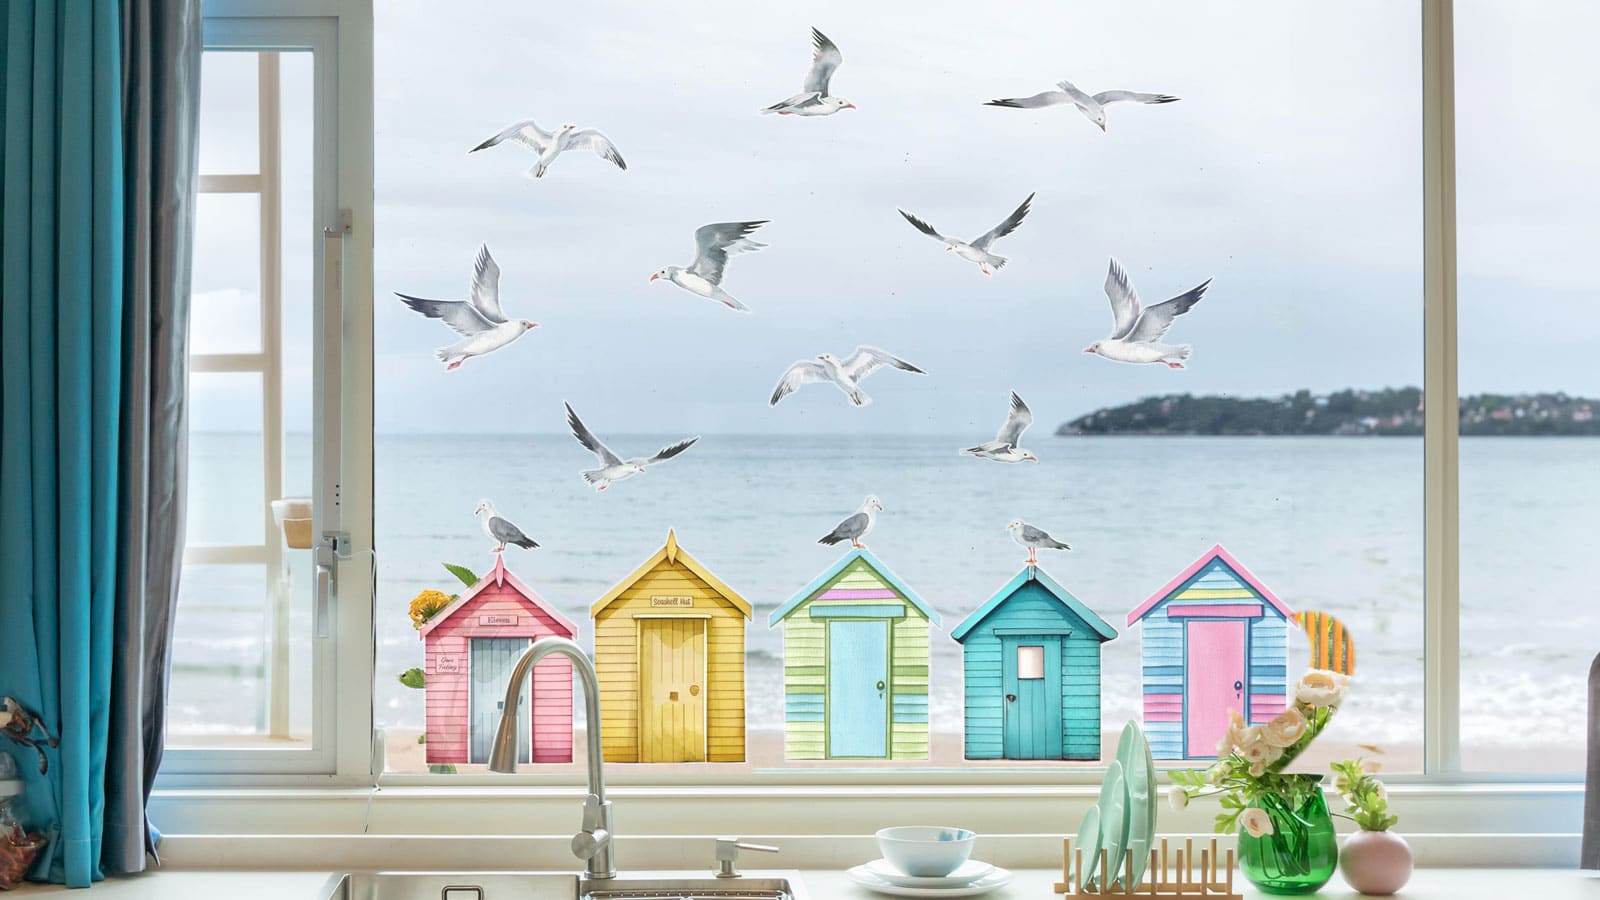 Seagulls and Beach Huts Window Stickers on a kitchen window in front of the sea